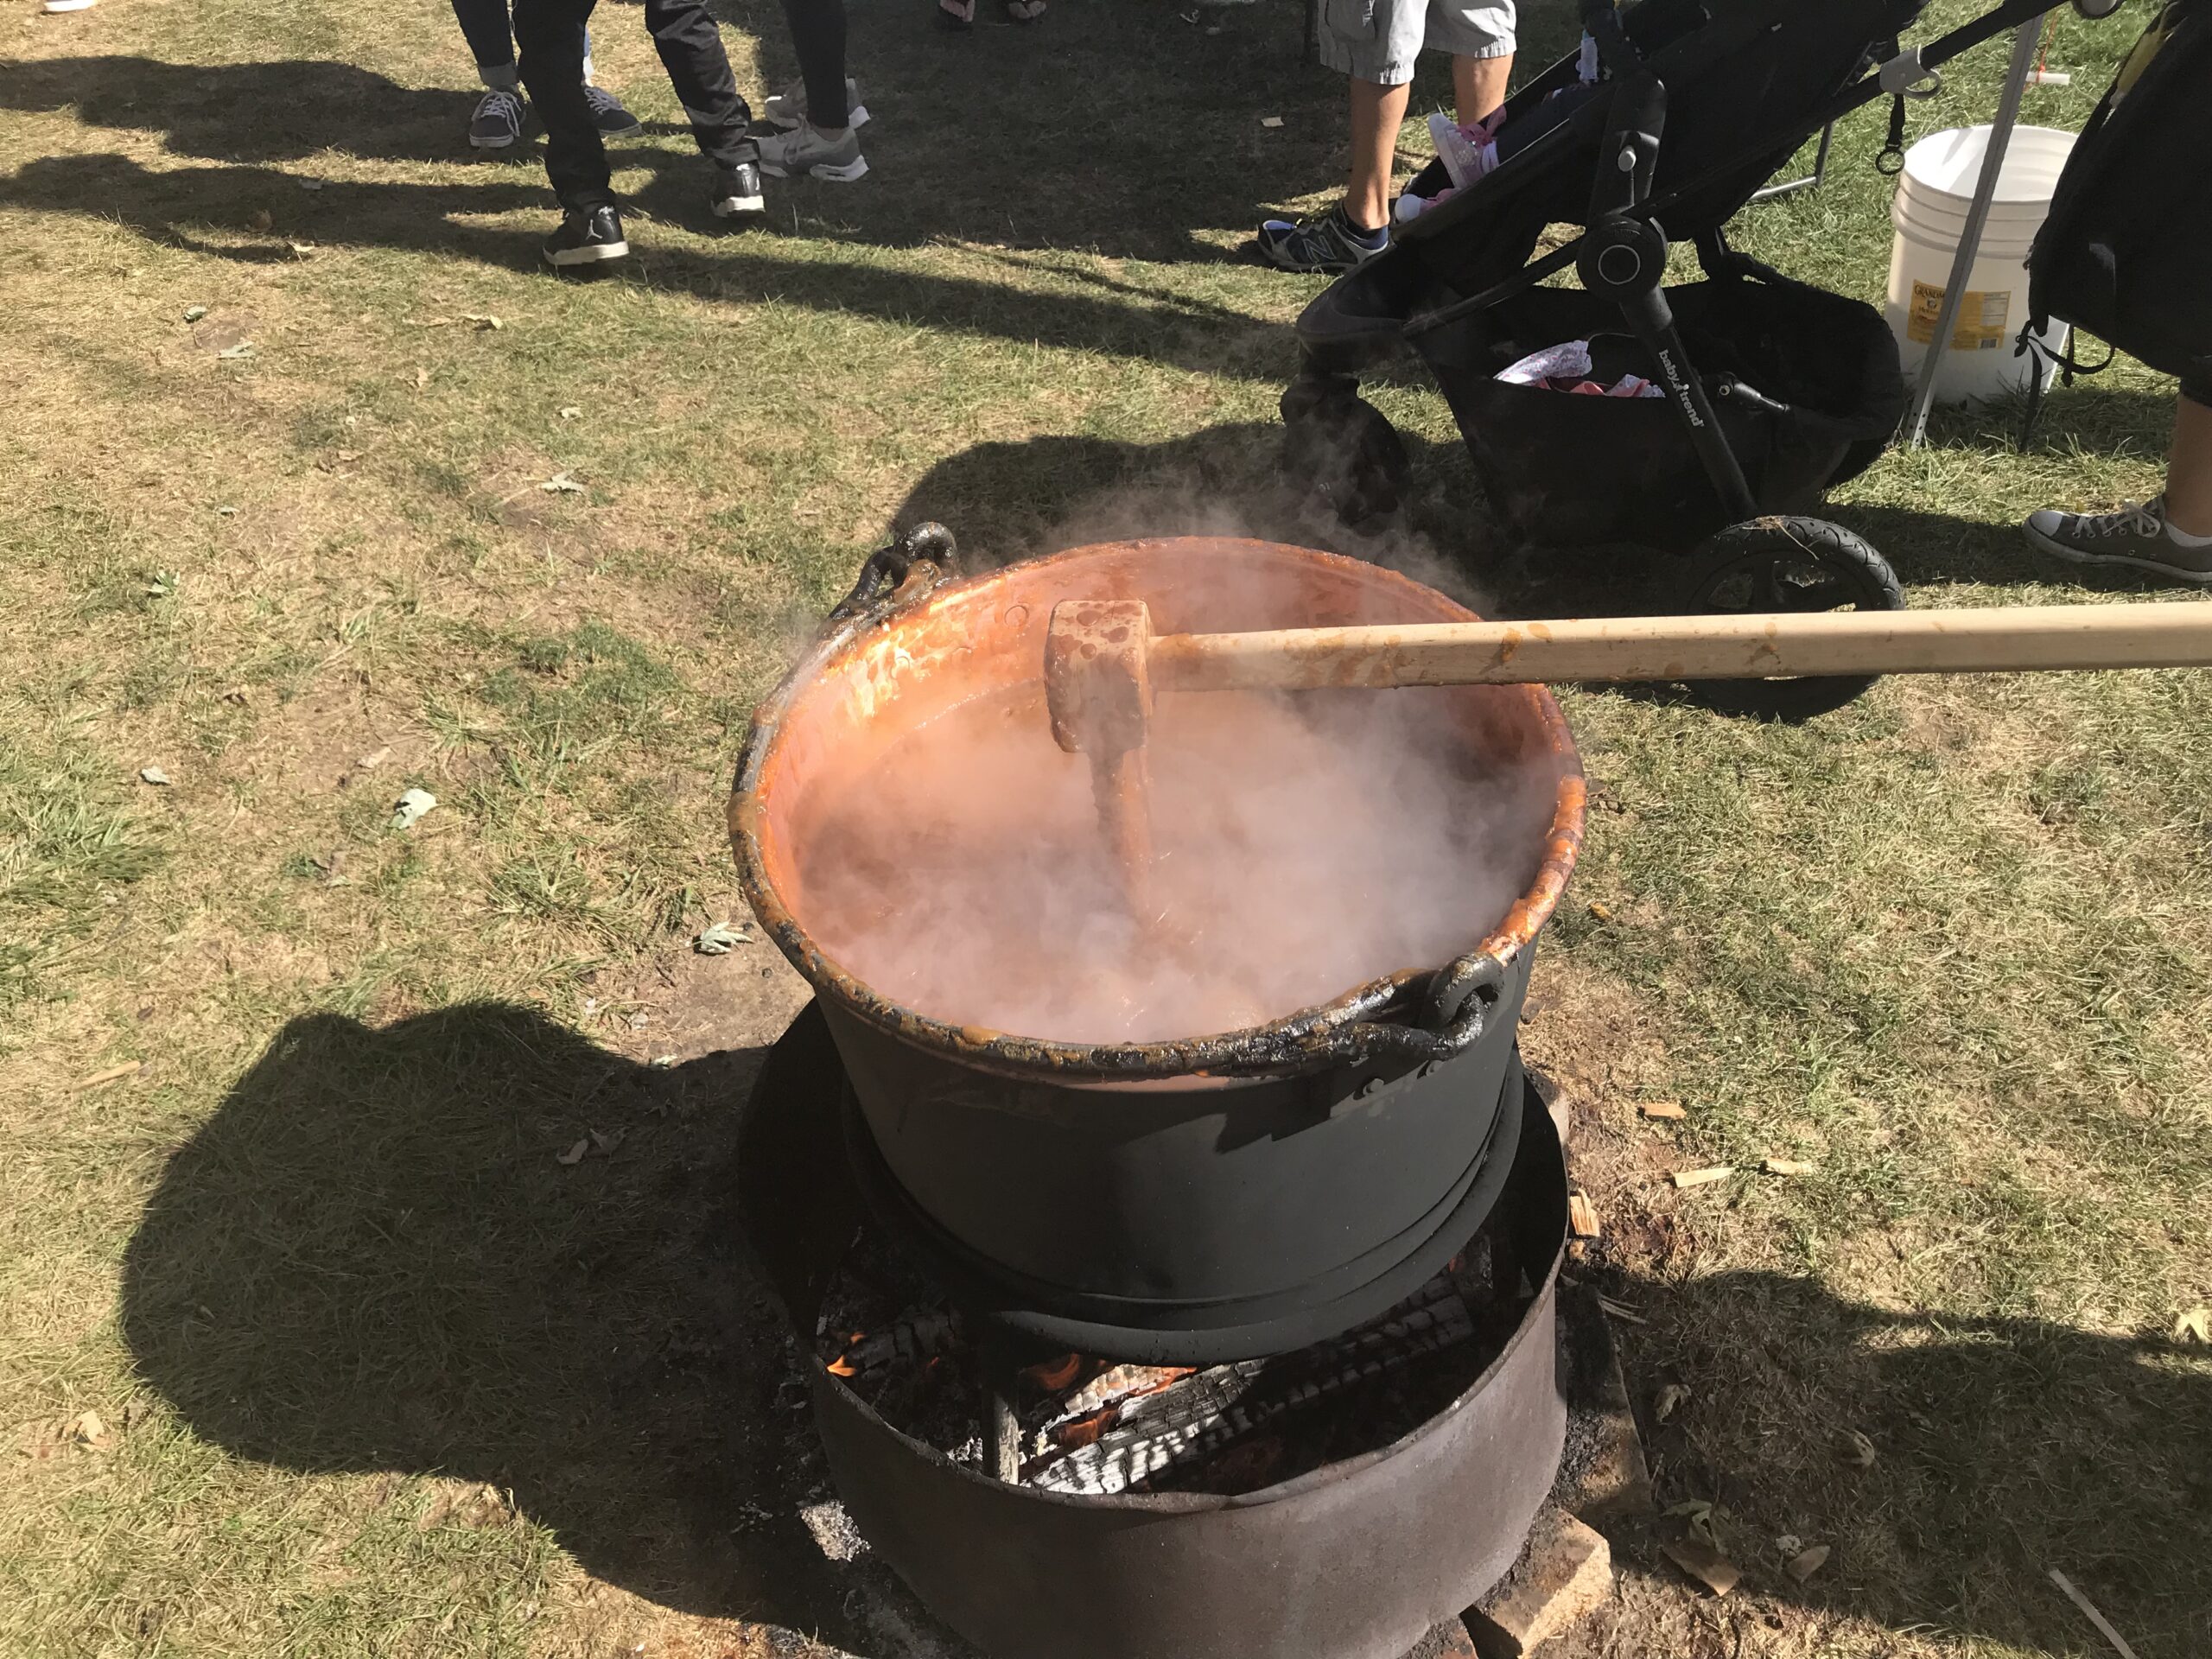 Rohrs’ Report: MacQueen’s Apple Butter Festival a Great Fall Activity